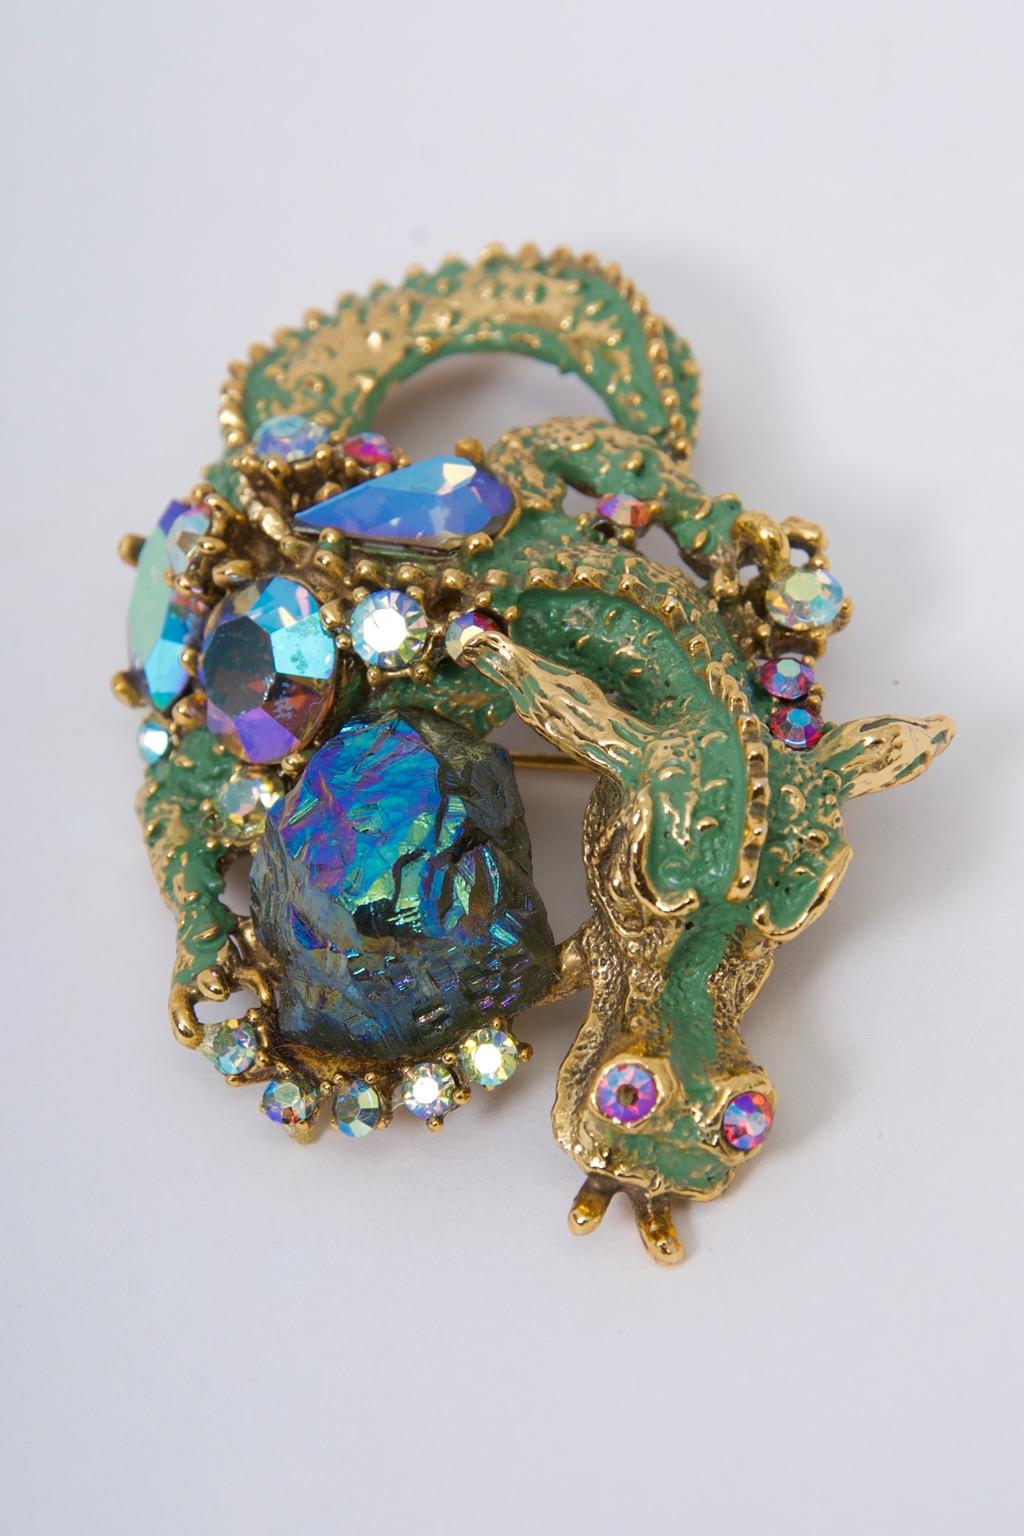 HAR dragon brooch fashioned of goldtone metal finished in green enamel and featuring the unusual lava stone as its central focus along with ABA rhinestones in various shapes and colors. Known for its idiosyncratic creations, HAR jewelry, founded by